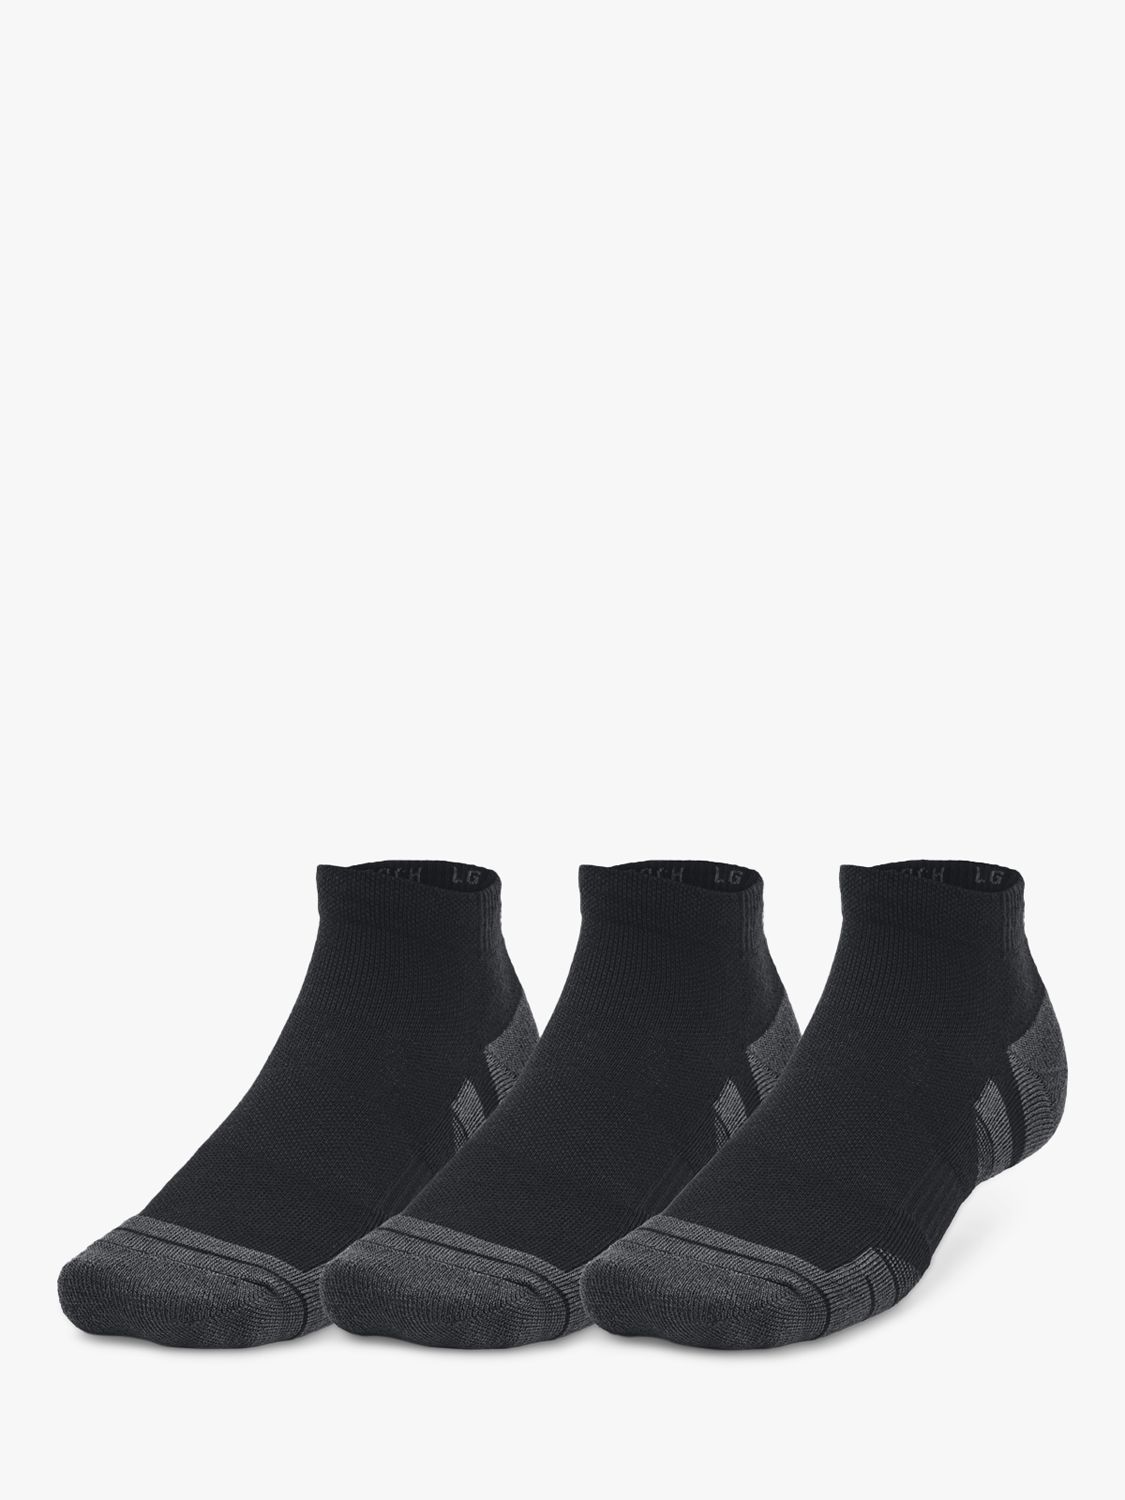 Buy Under Armour Performance Tech Low Cut Socks, Pack of 3, Black/Jet Gray Online at johnlewis.com